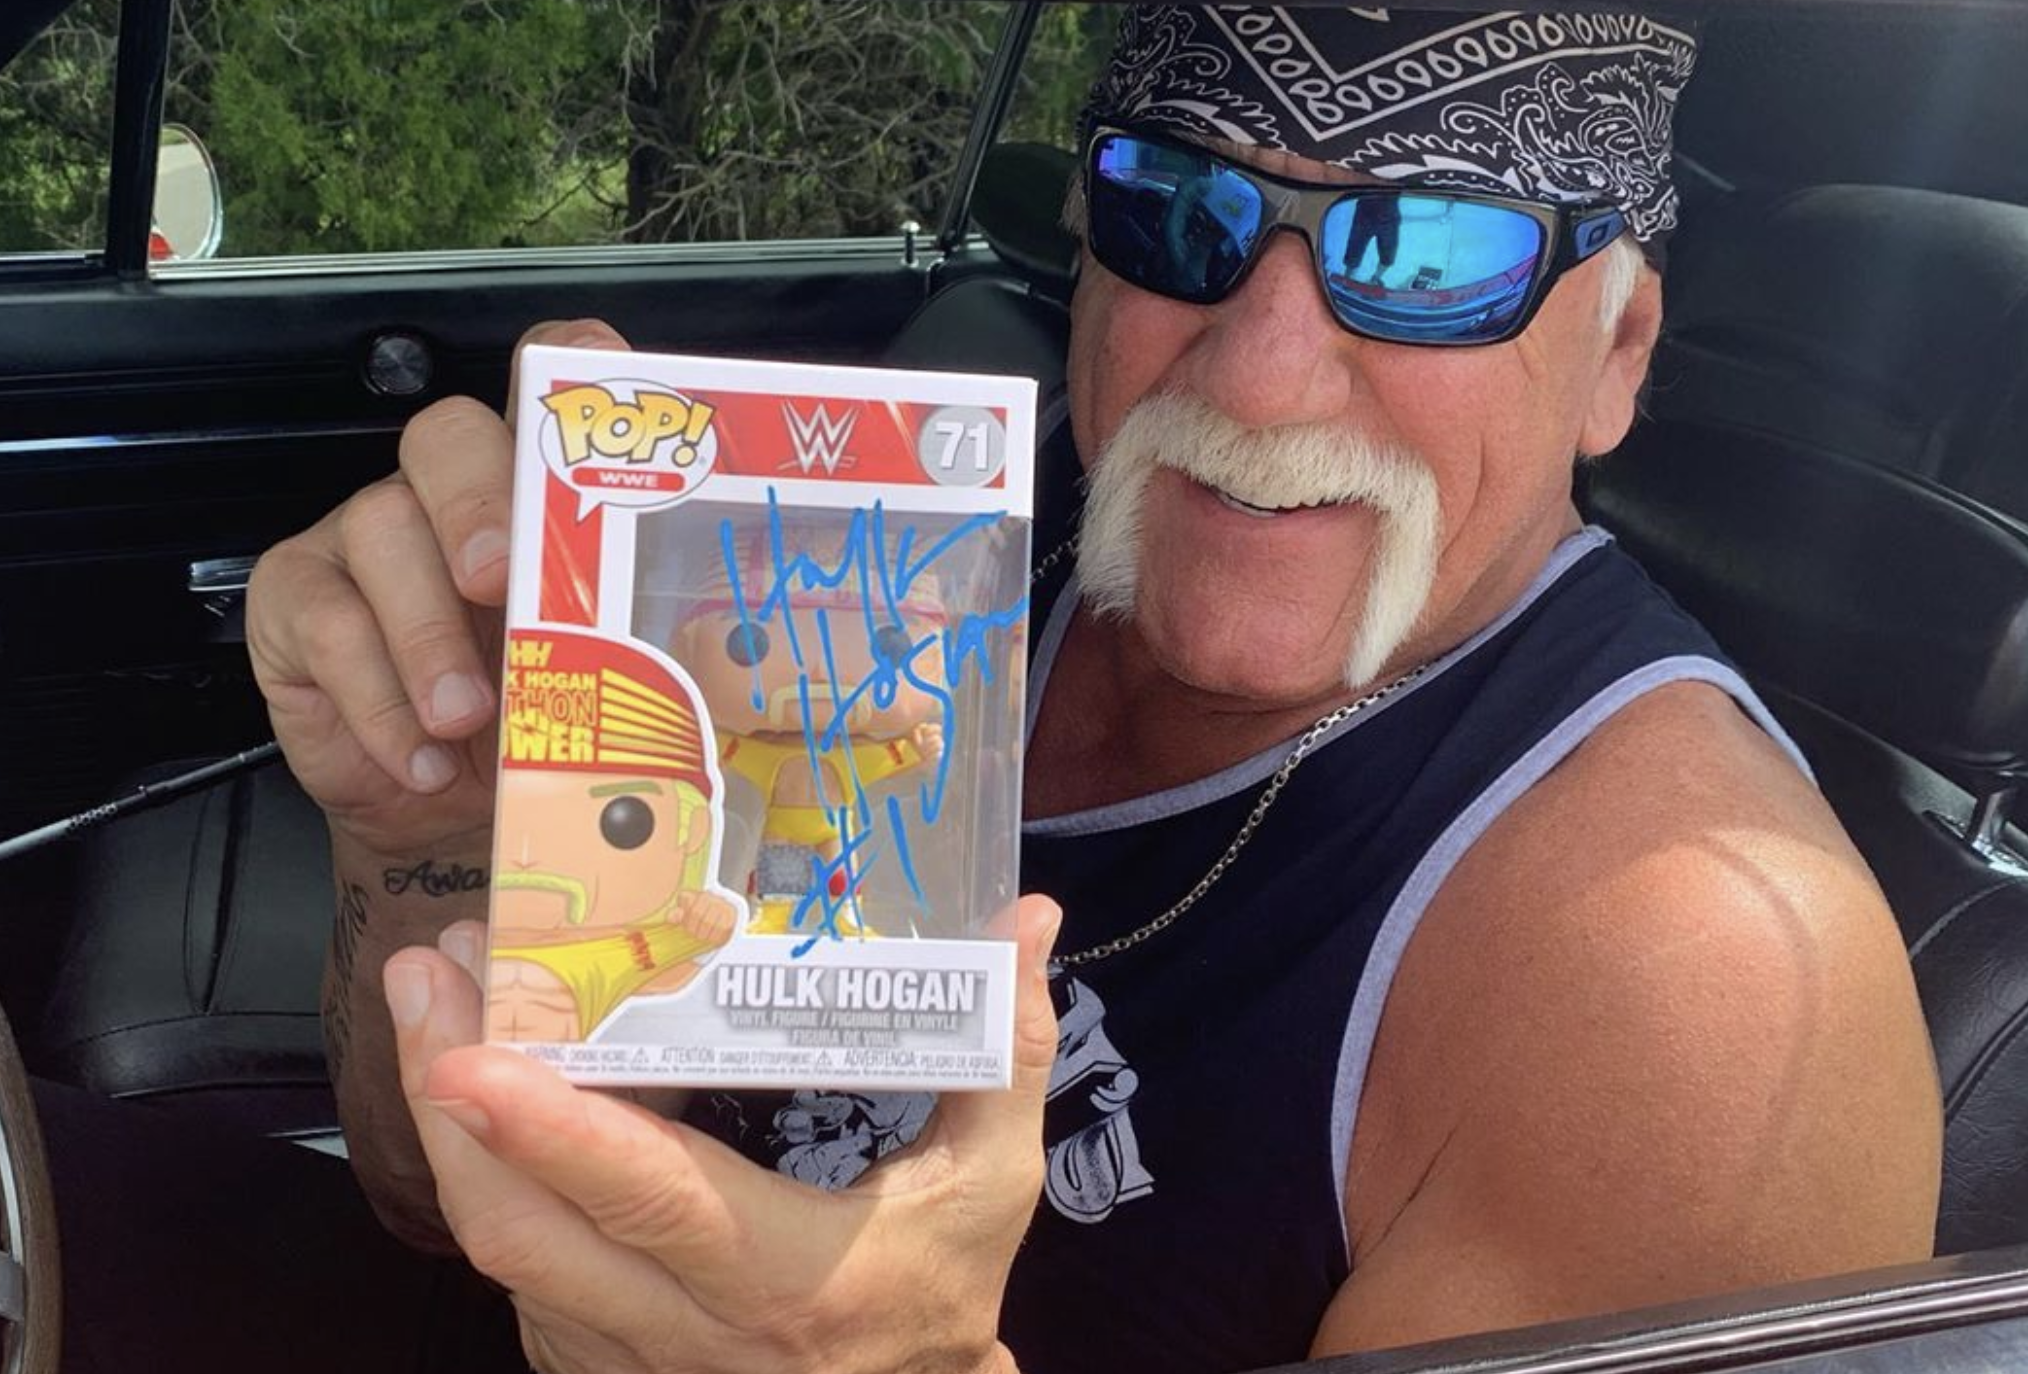 Hulk Hogan is now incorrectly suggesting we don't need vaccines' Blogs